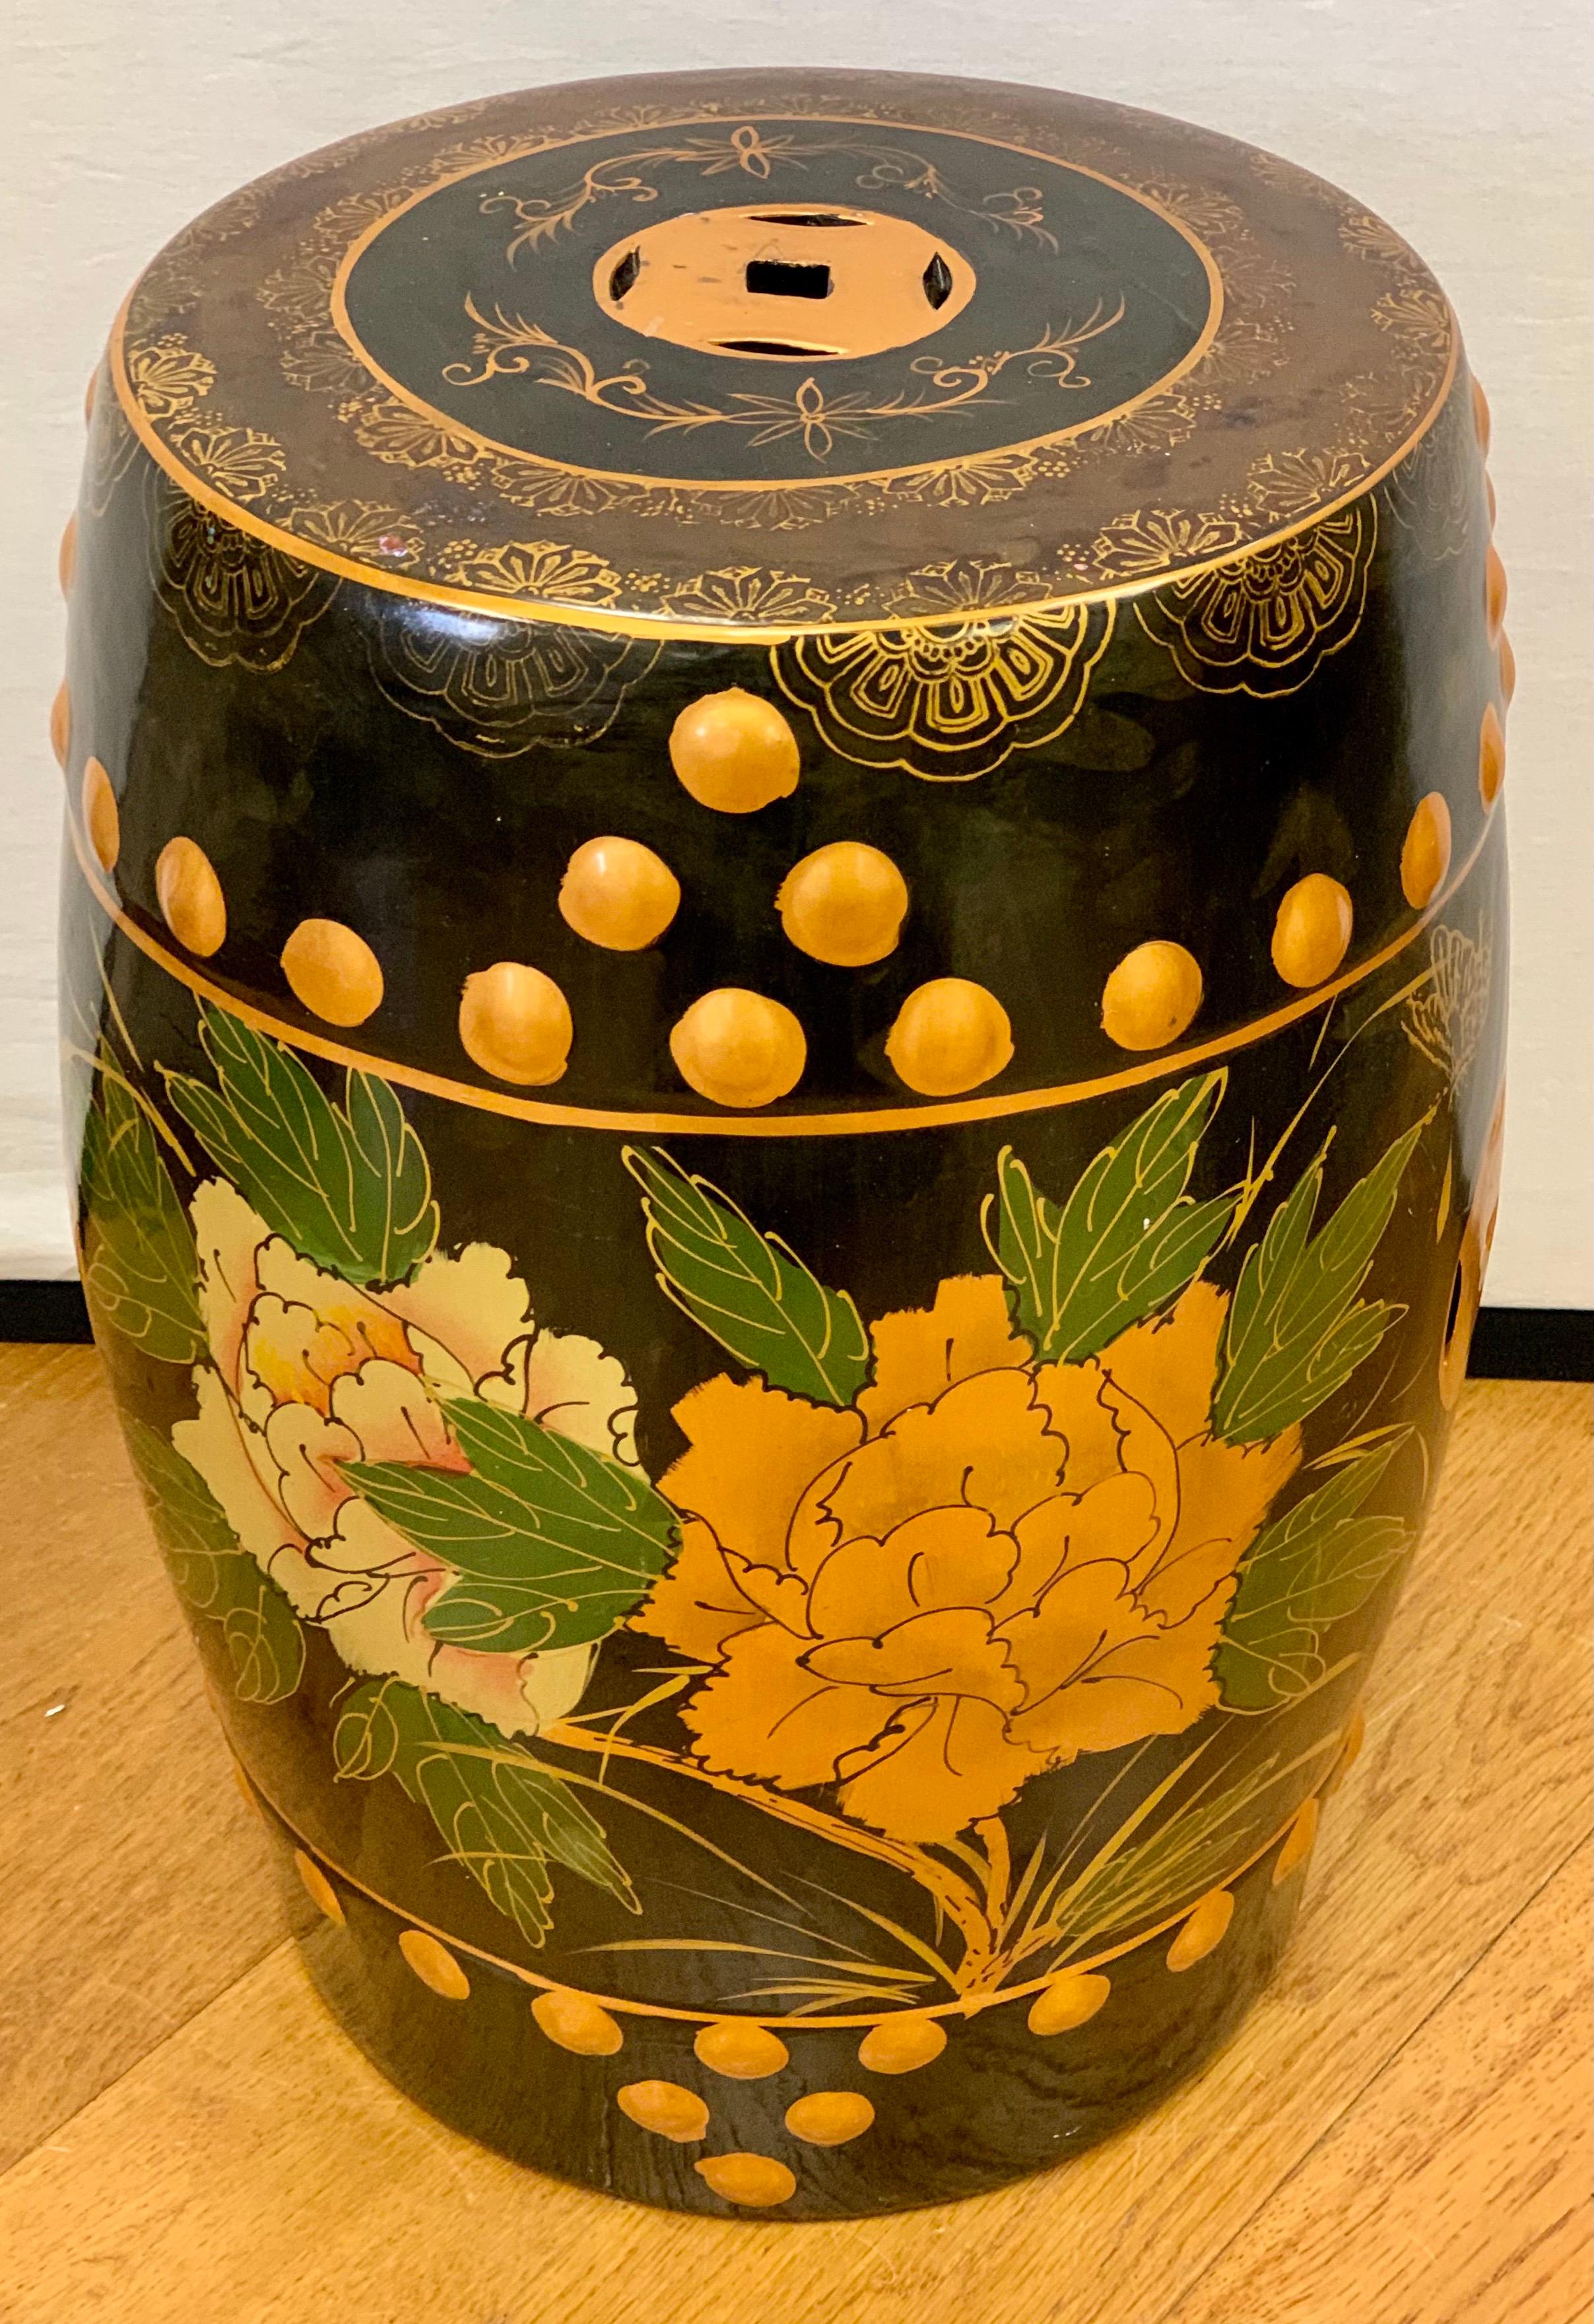 This unique Chinese porcelain garden stool has a black and gold color scheme with hand painted peonies and raised round gold detail all around.